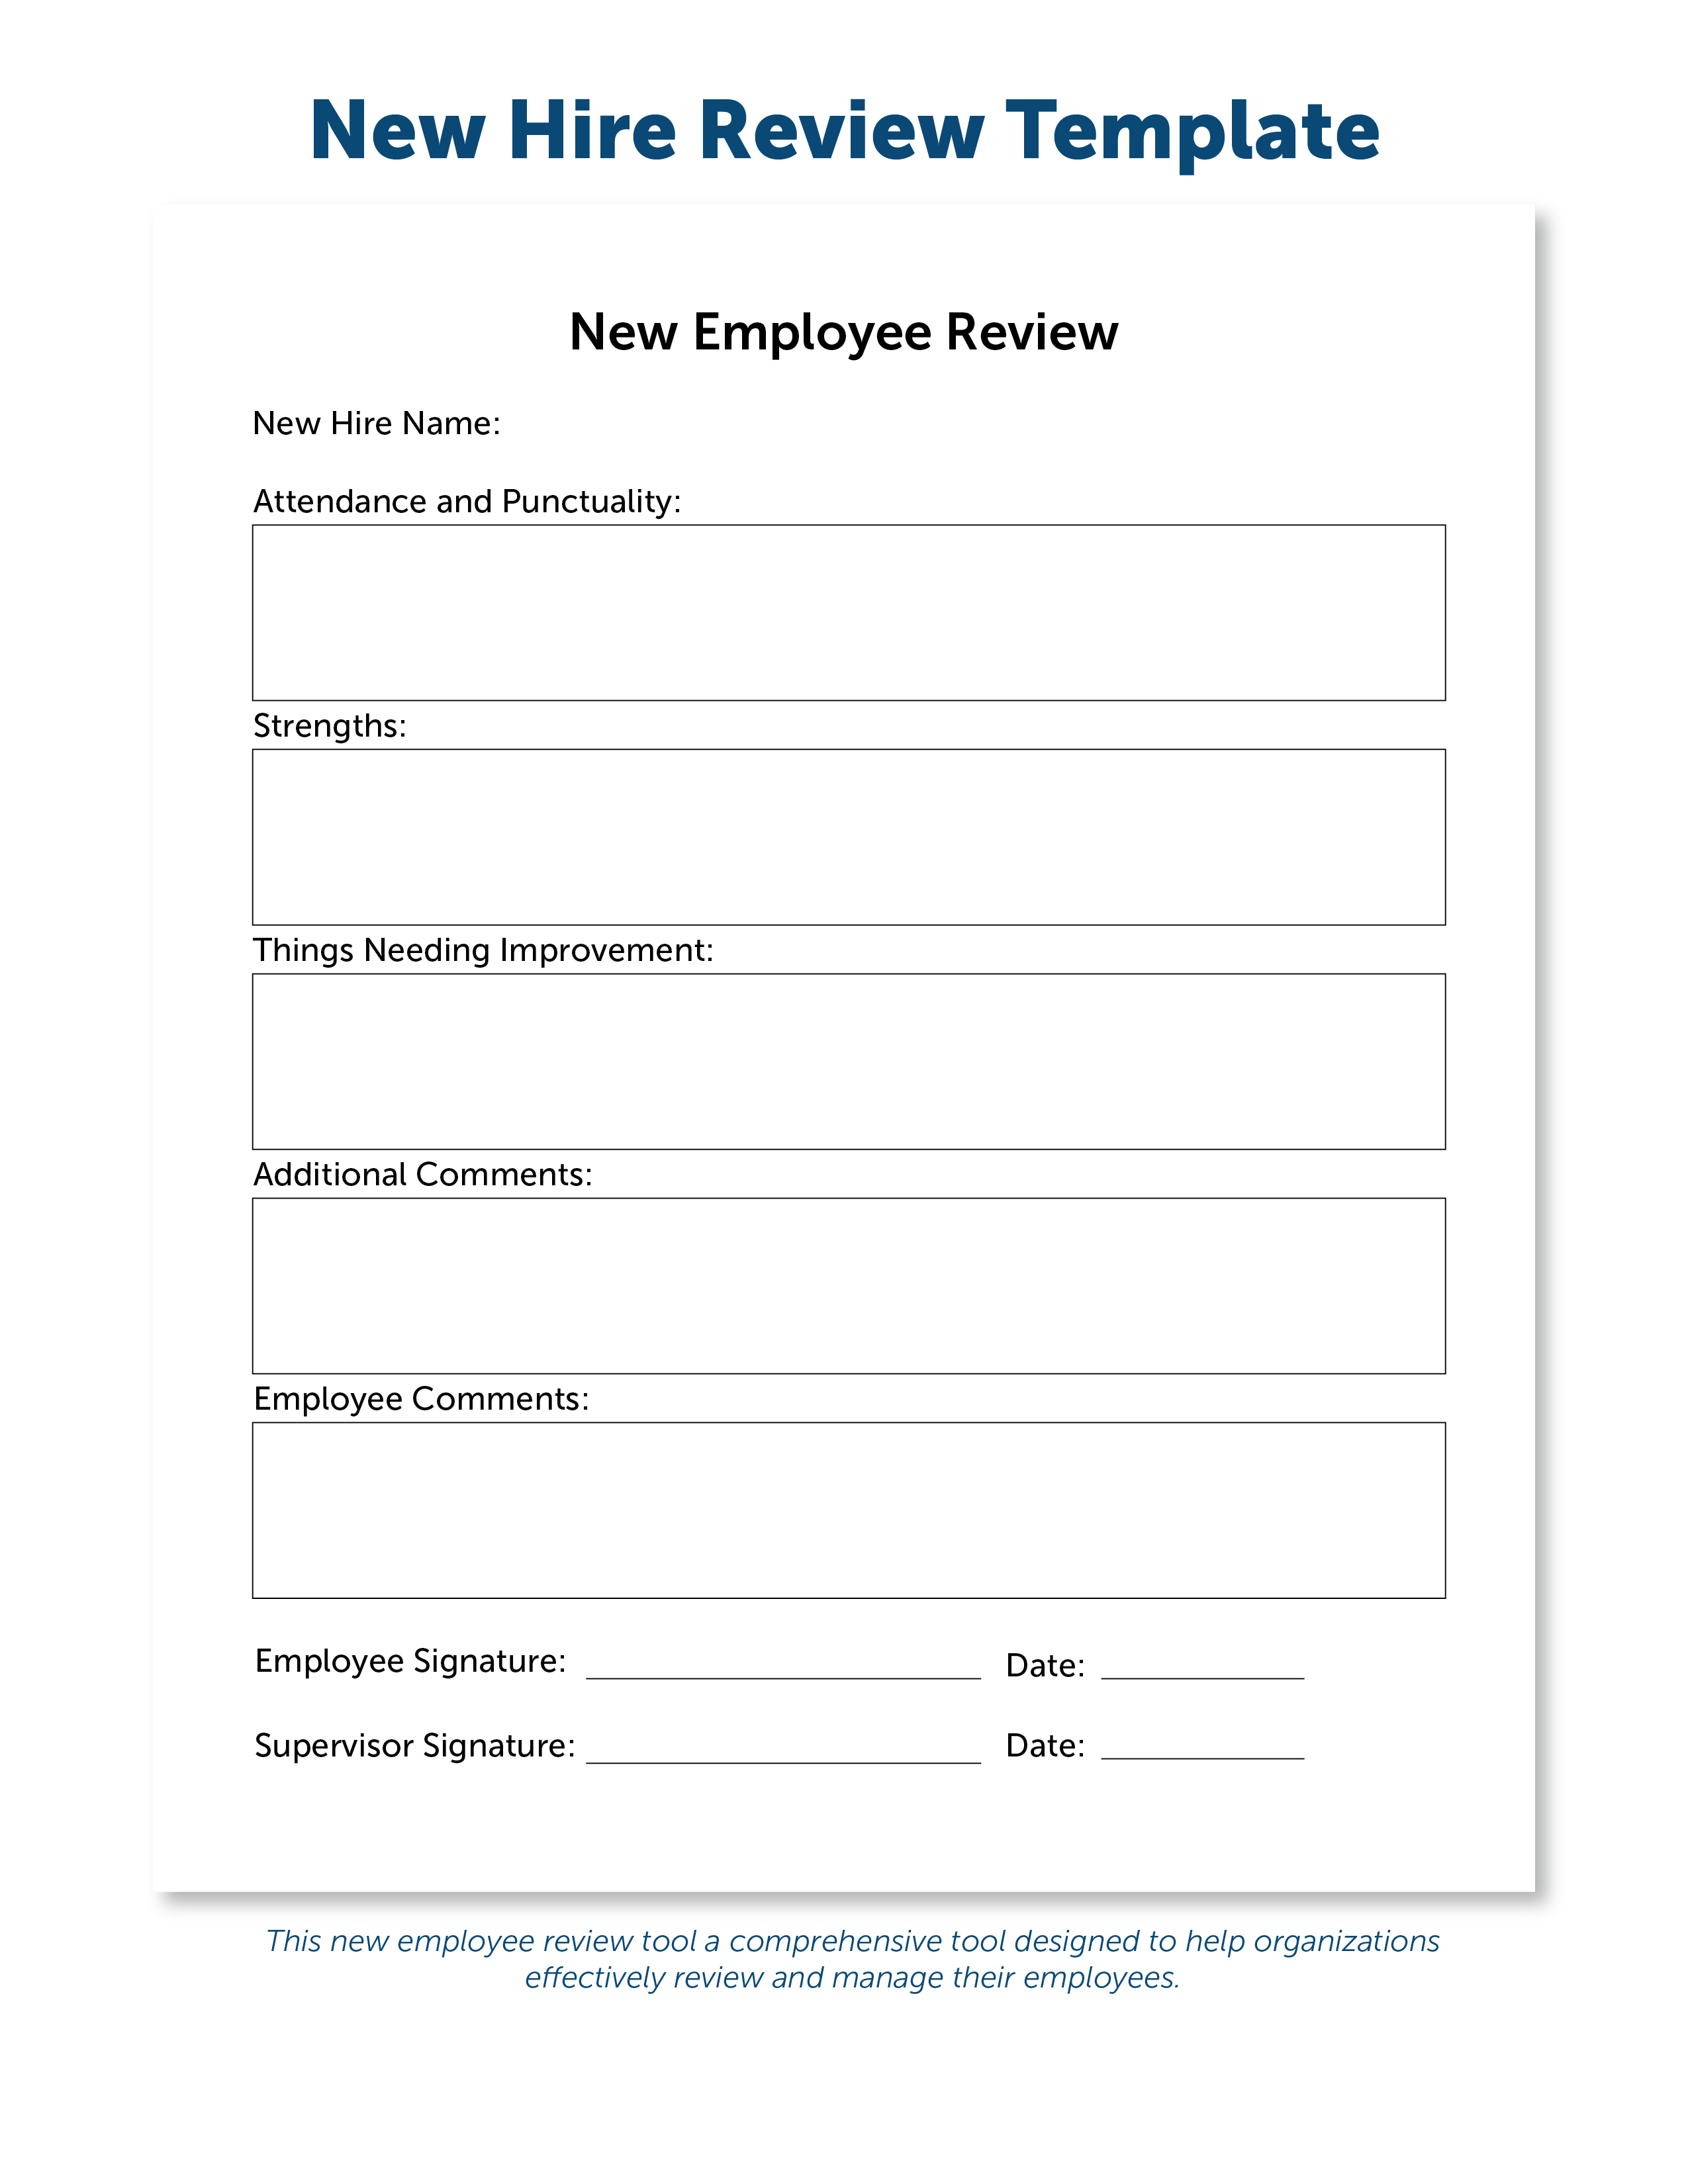 a new hire review template with areas to write strengths, weaknesses, and punctuality.